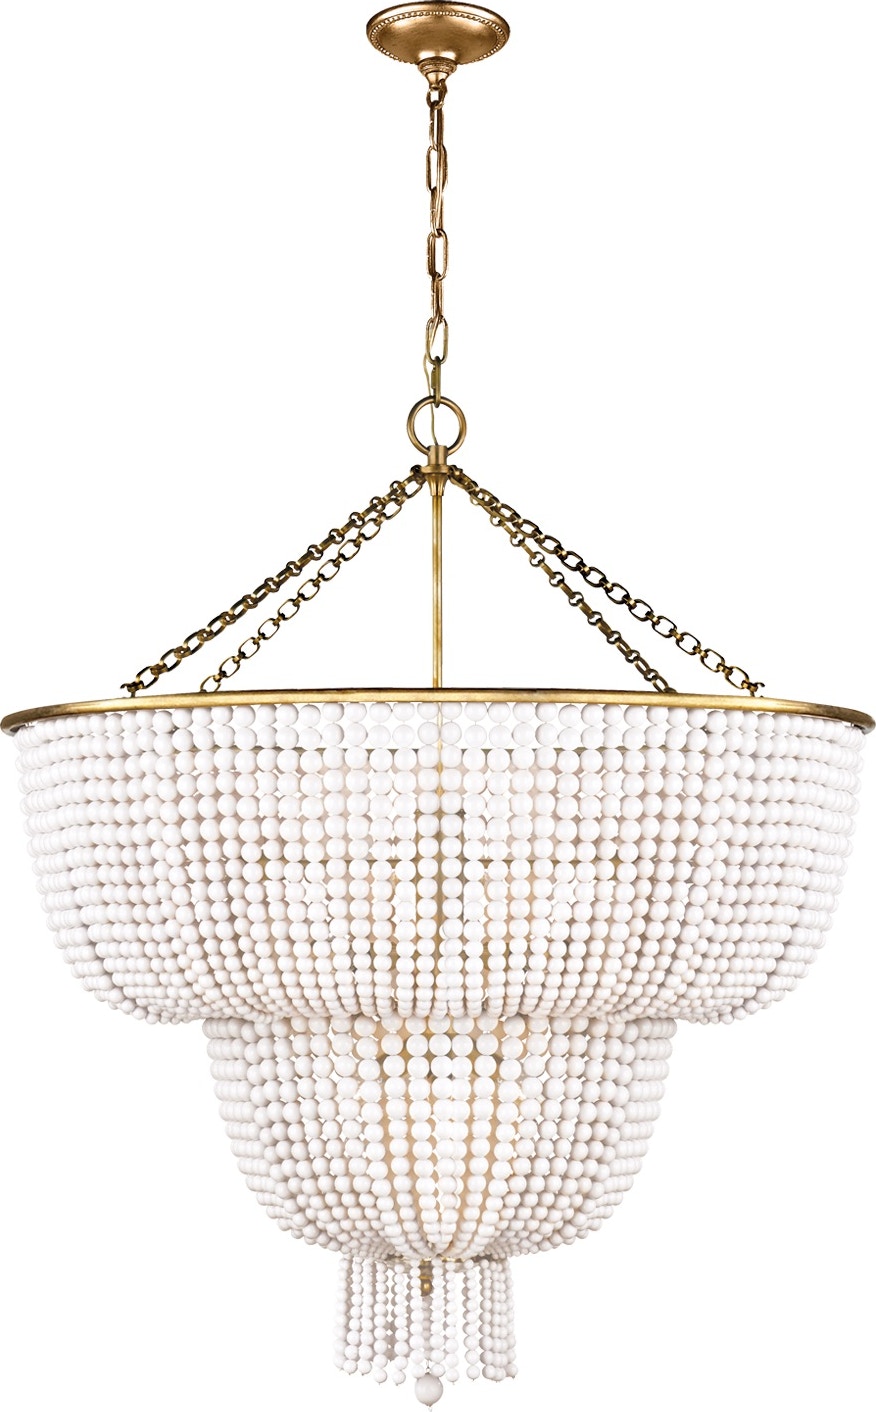 Jacqueline Two-tier Chandelier In Hand-rubbed Antique Brass With White  Acrylic